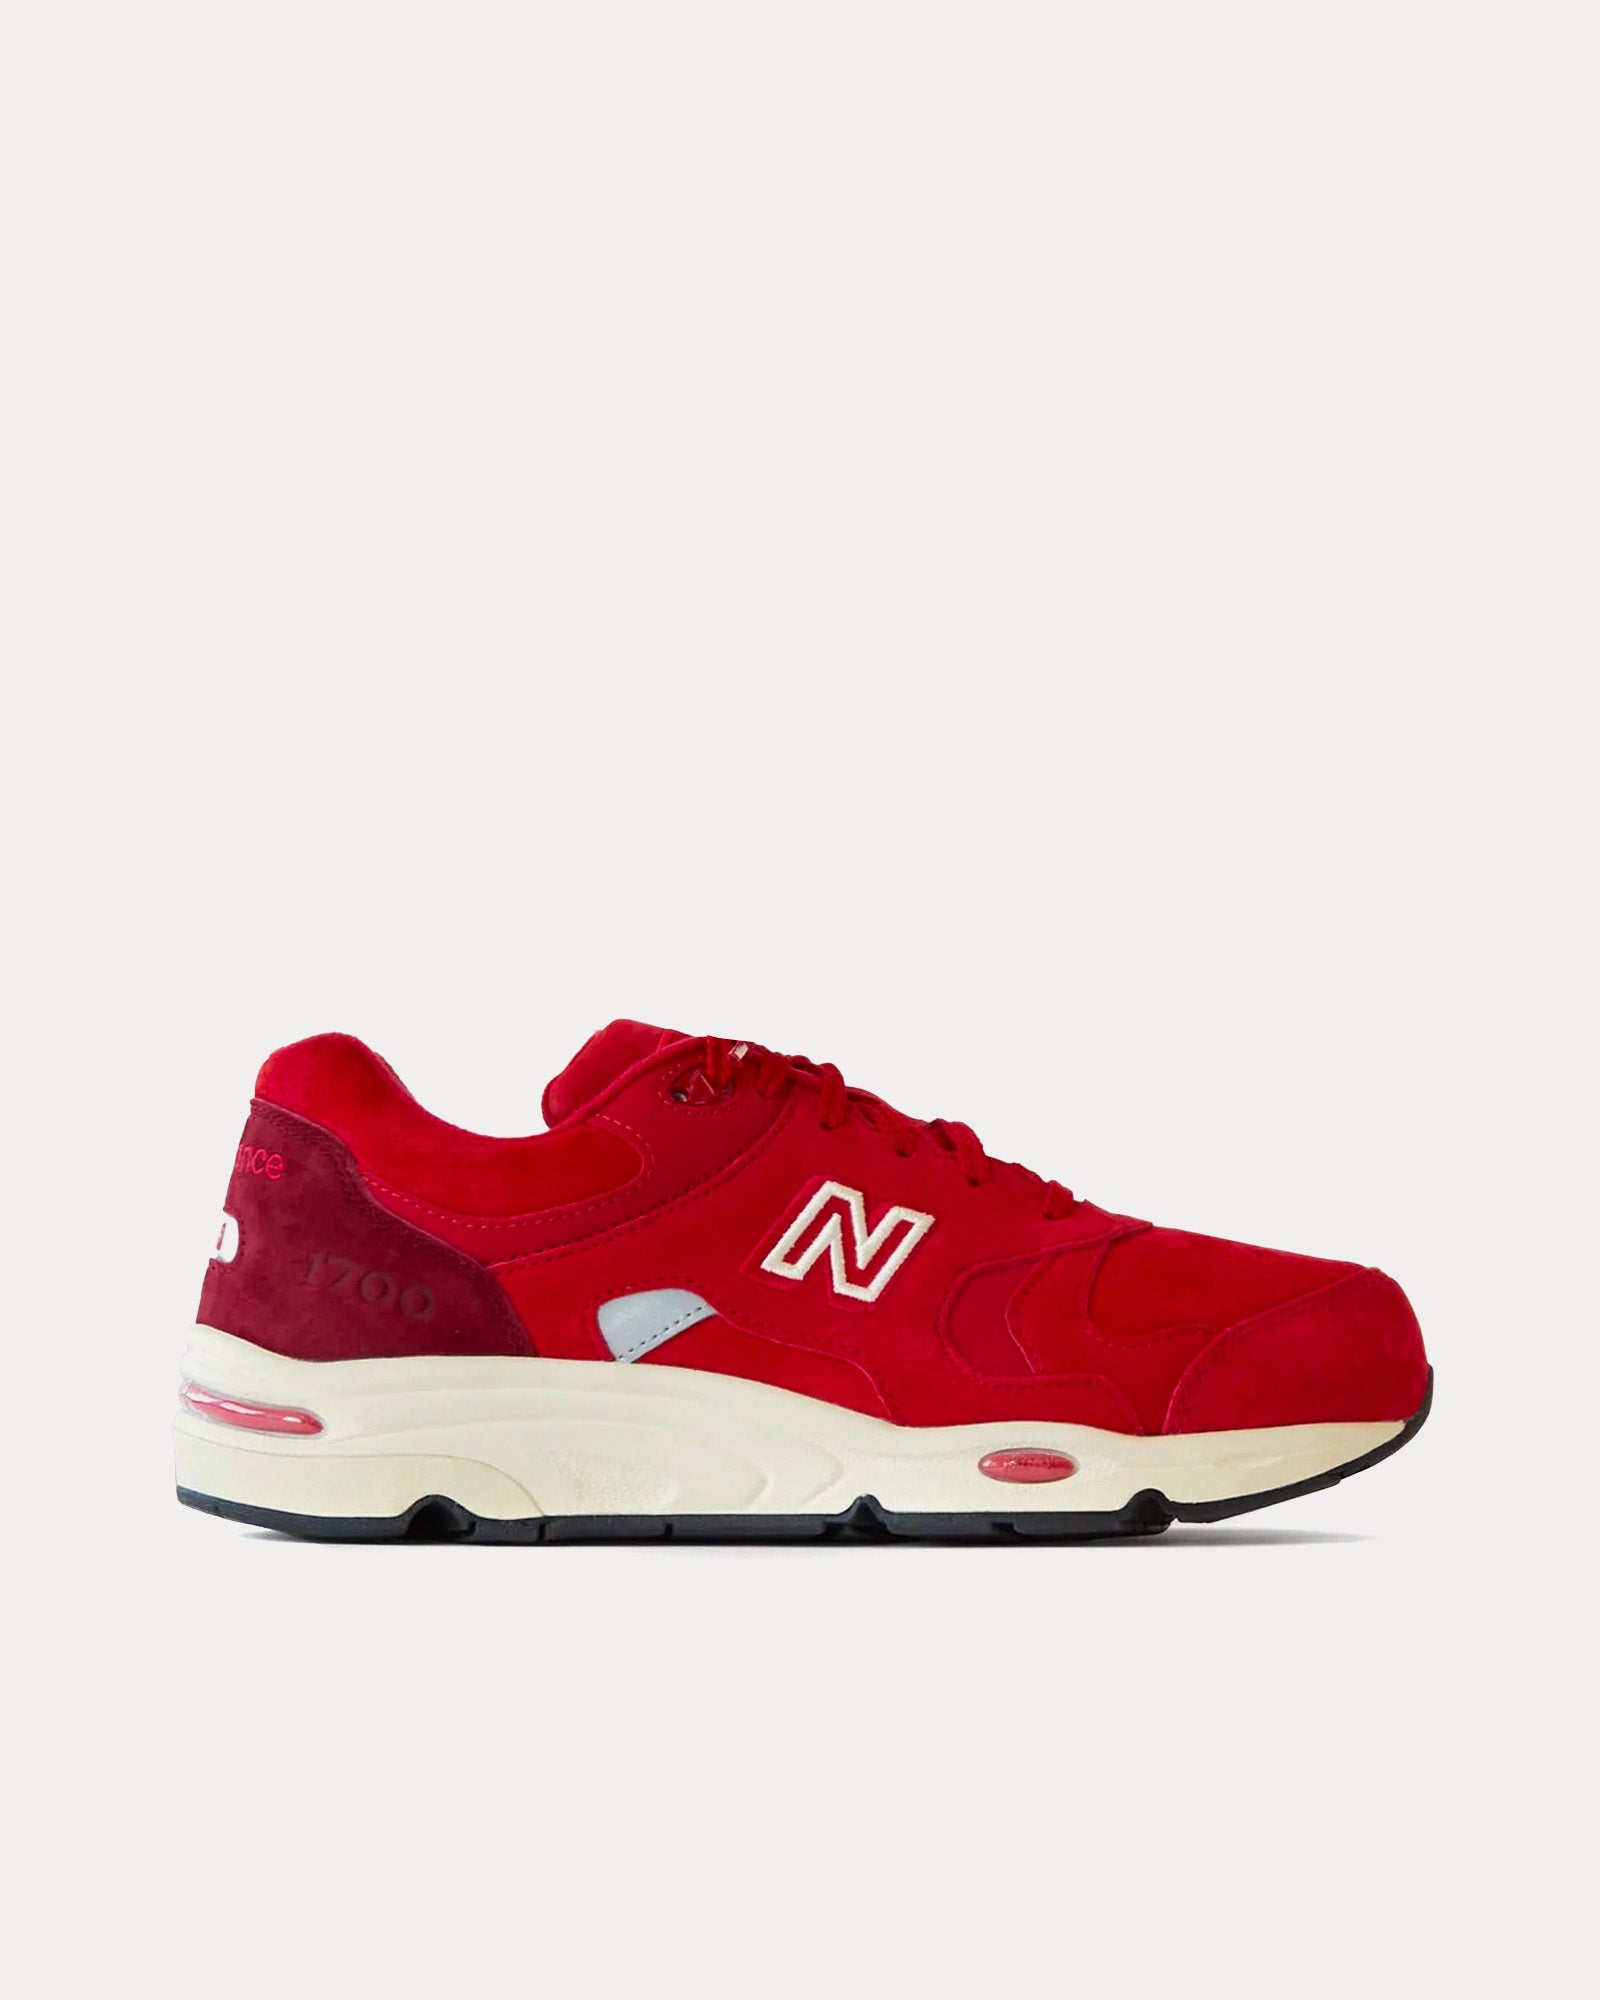 New Balance x Kith 1700 Toronto Rococco Red Low Top Sneakers ...